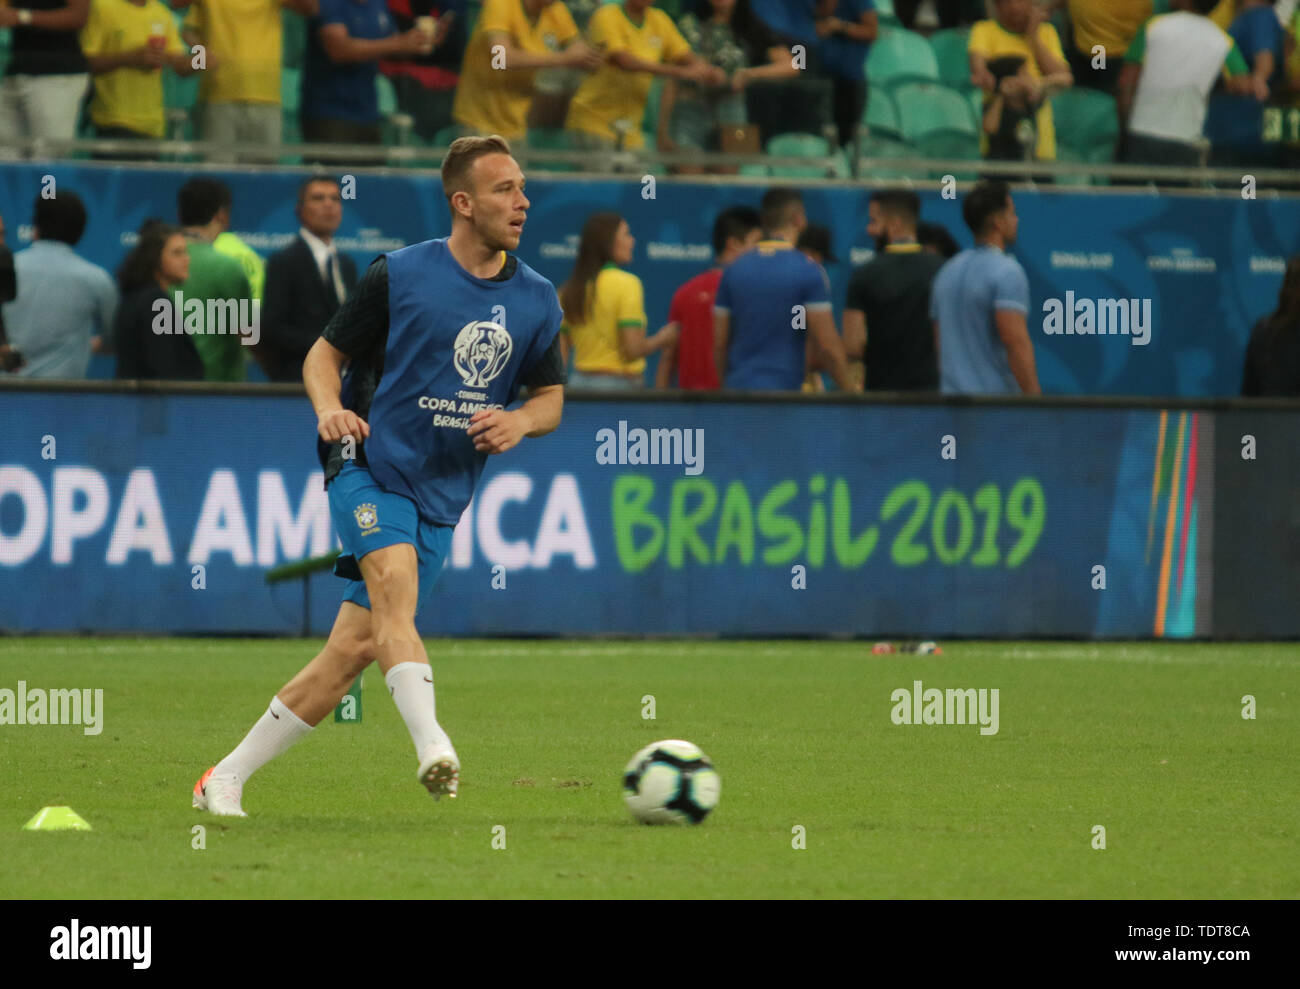 Salvador, Brazil. 18th June, 2019. Arthur, a player of the Brazilian national team and barcelona, before the match between Brazil and Venezuela, valid for the 2019 Copa America group stage, held on Tuesday (18) at the Fonte Nova Arena in Salvador, Bahia, Brazil. Credit: Tiago Caldas/FotoArena/Alamy Live News Stock Photo